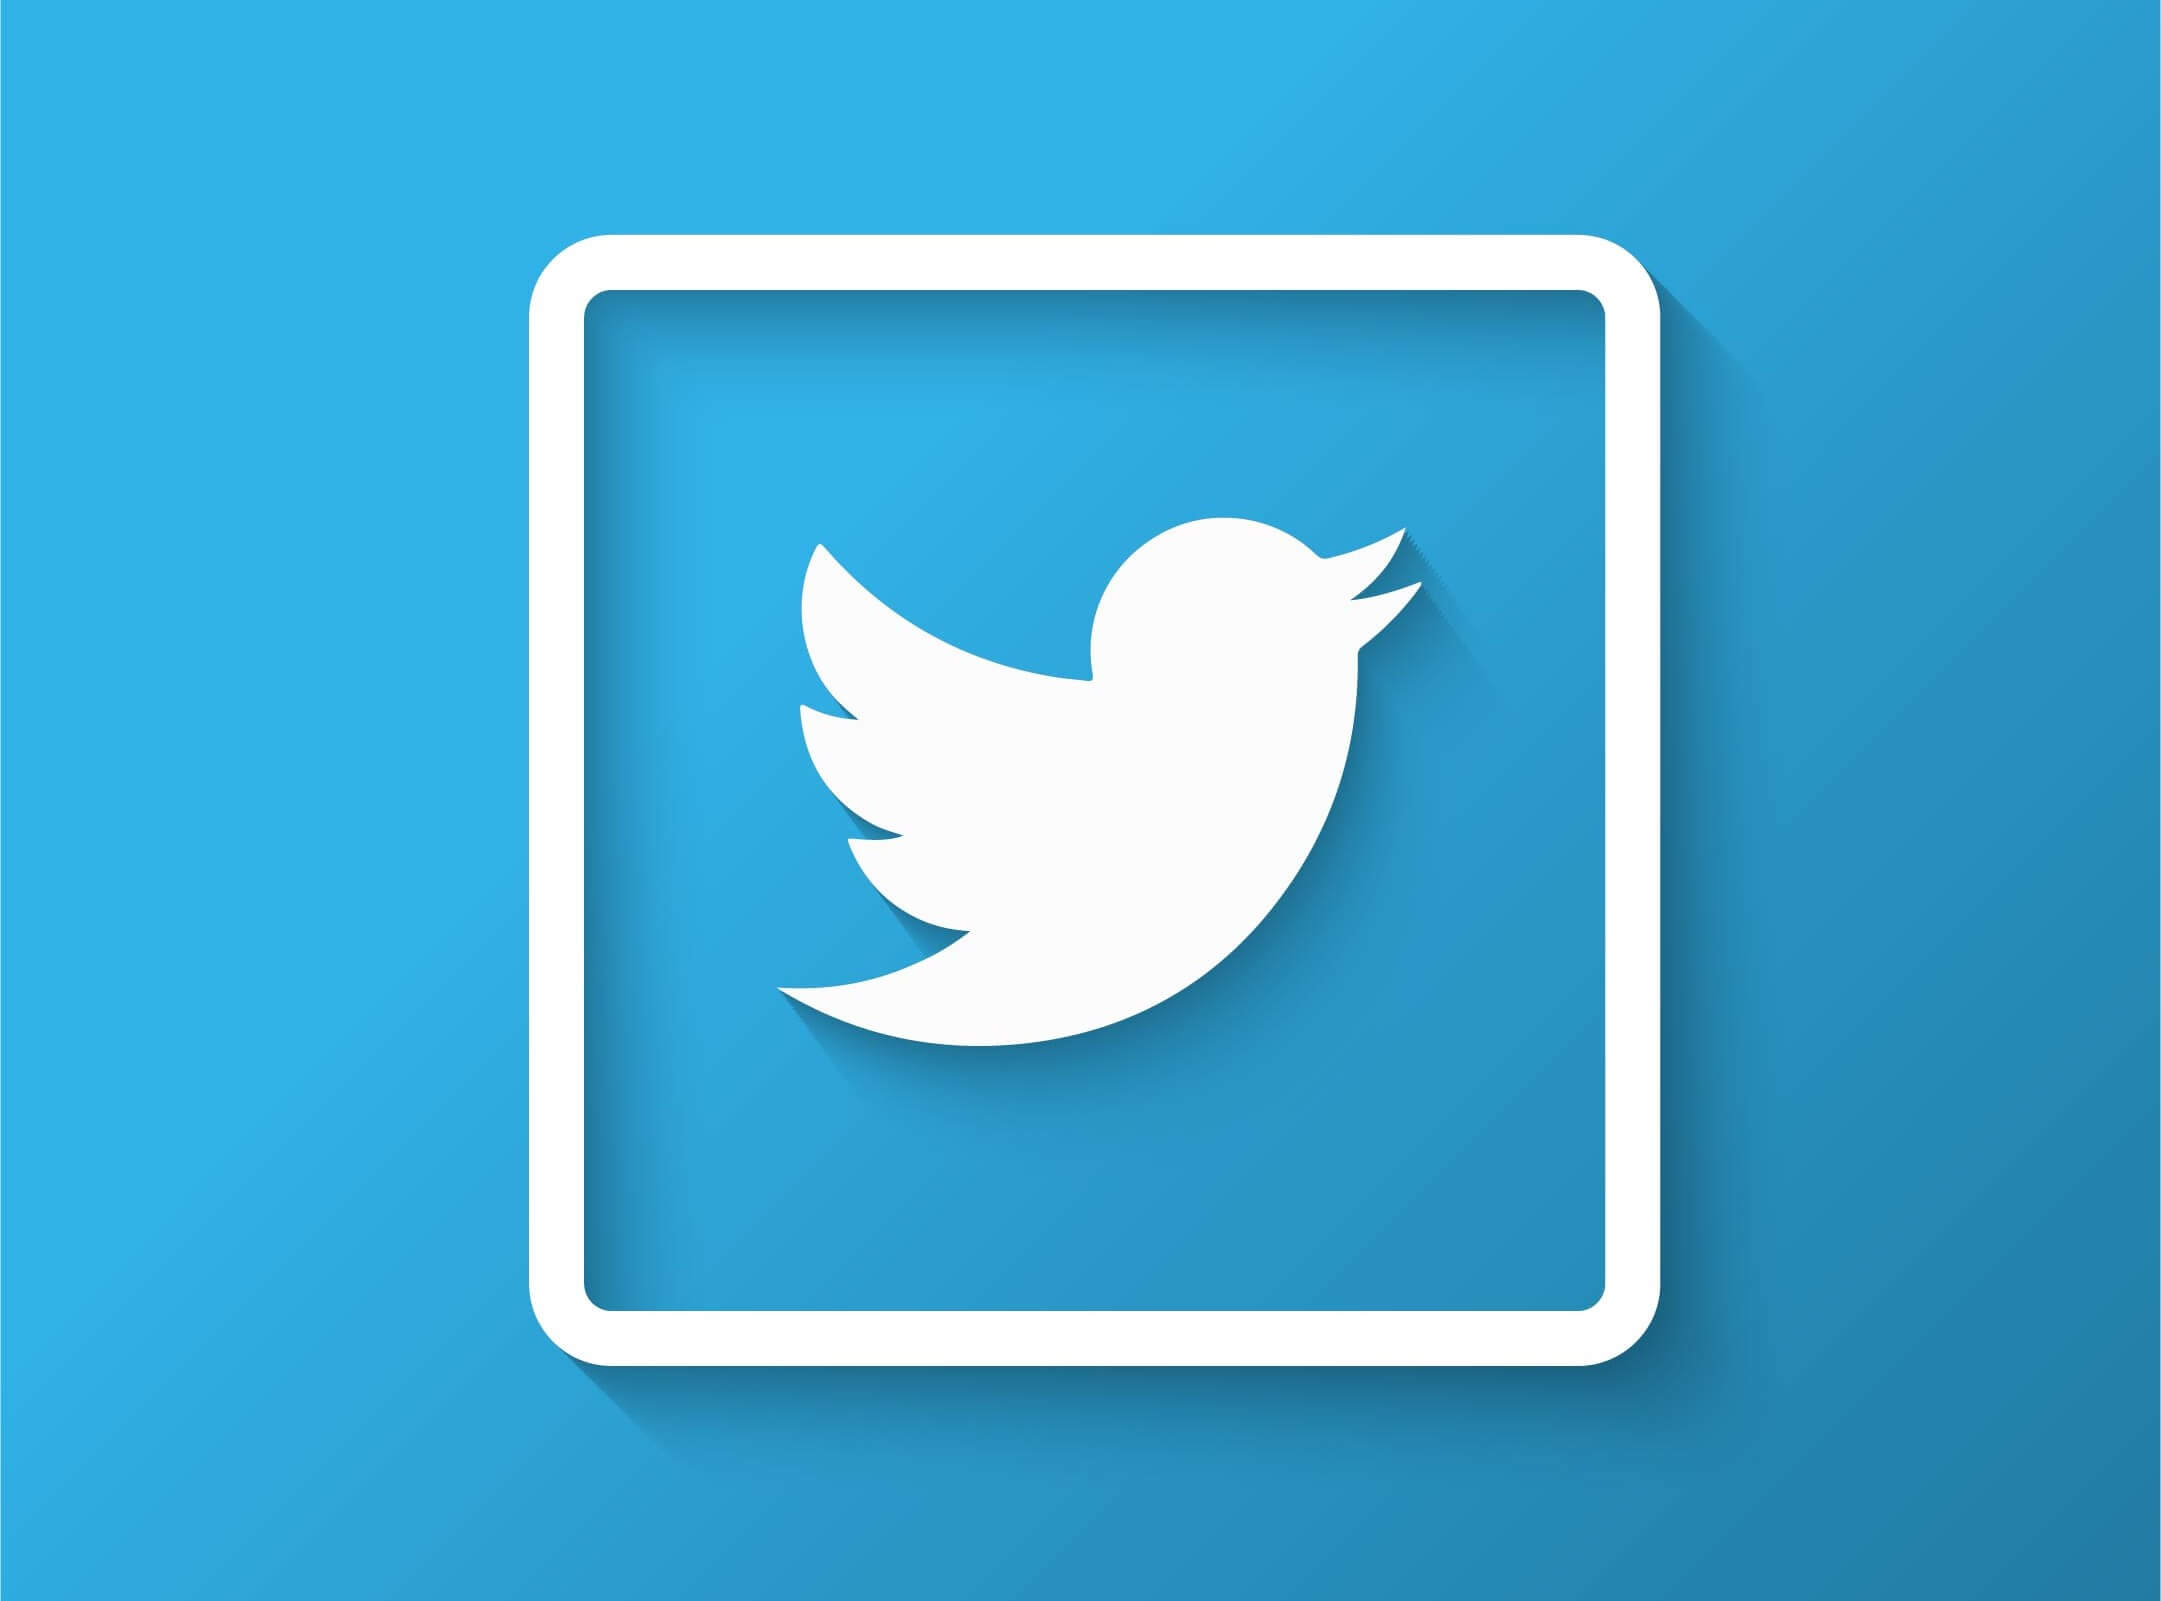 Twitter logo in a box on a blue background